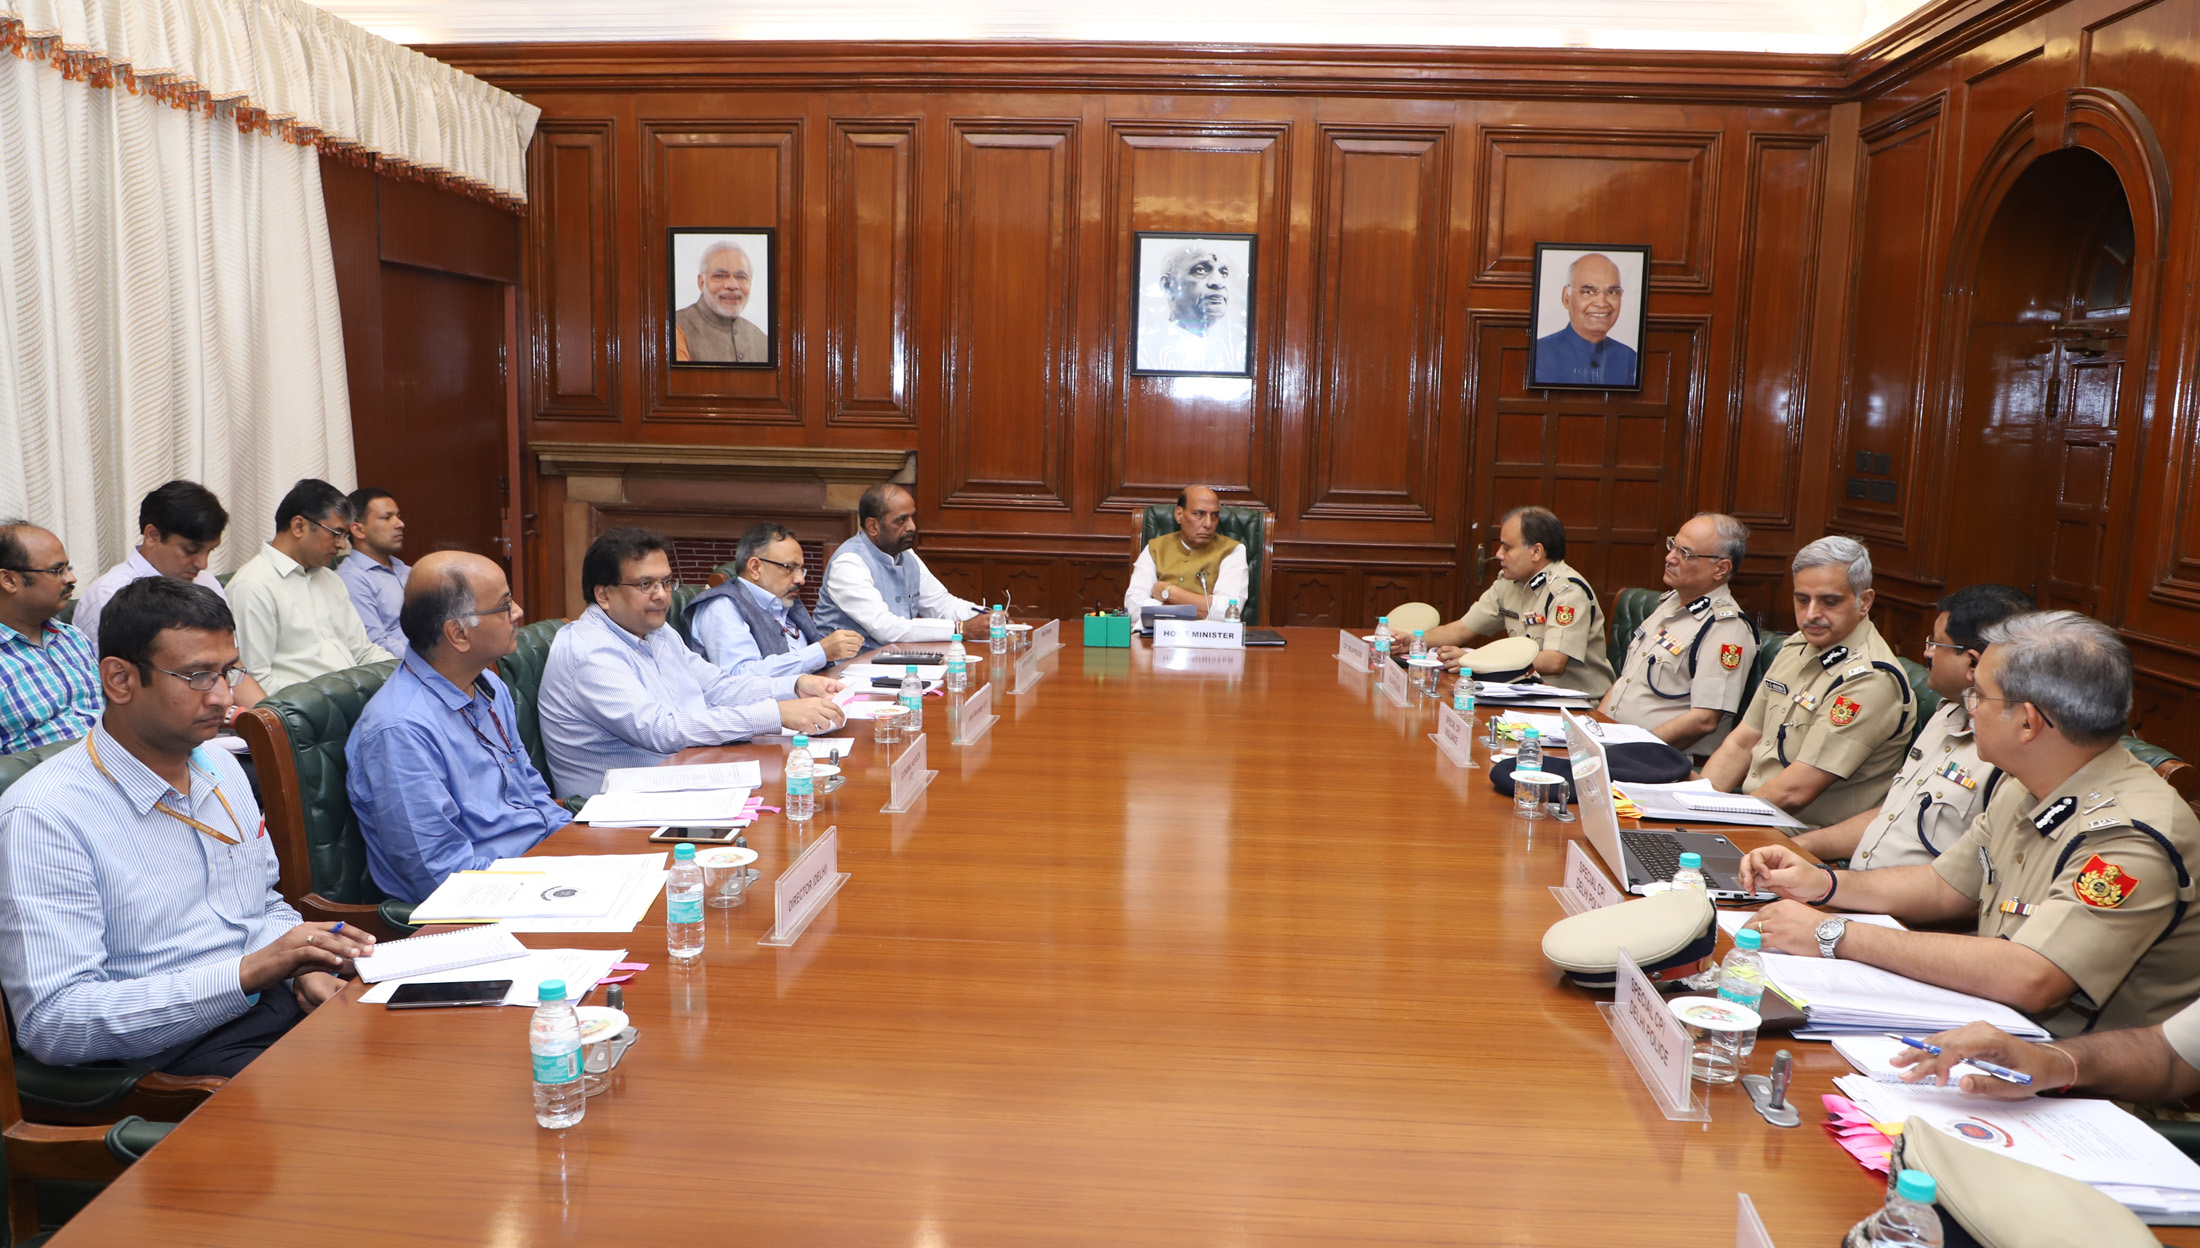 The Union Home Minister, Shri Rajnath Singh chairing a review meeting of the Delhi Police, in New Delhi on June 29, 2018. The Minister of State for Home Affairs, Shri Hansraj Gangaram Ahir, the Union Home Secretary, Shri Rajiv Gauba and the Delhi Police Commissioner, Shri Amulya Patnaik and senior officers are also seen.